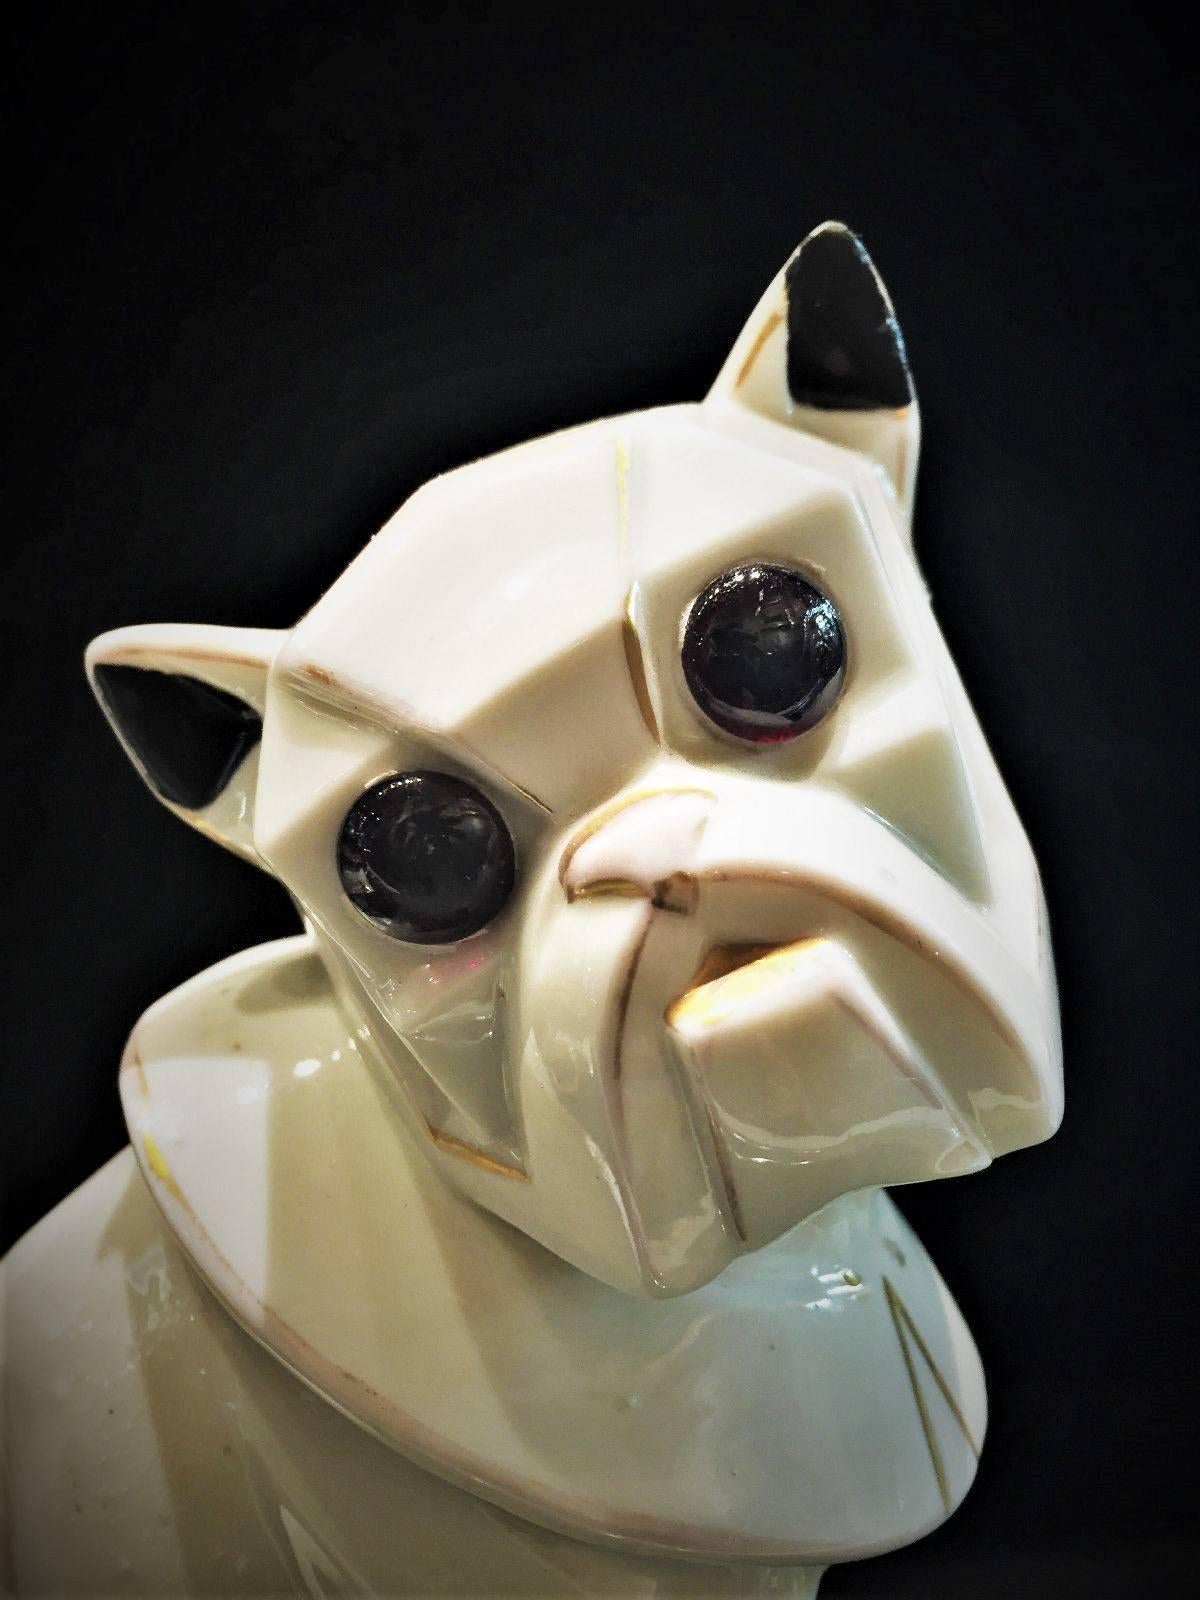 A rare Art Deco Cubist white porcelain nightstand lamp in form of a French Bulldog with gilt details, dating from 1920s, Germany. The dog's eyes and tips of the ears are hand-painted black. Though unmarked, it is most likely produced by Sitzendorf.